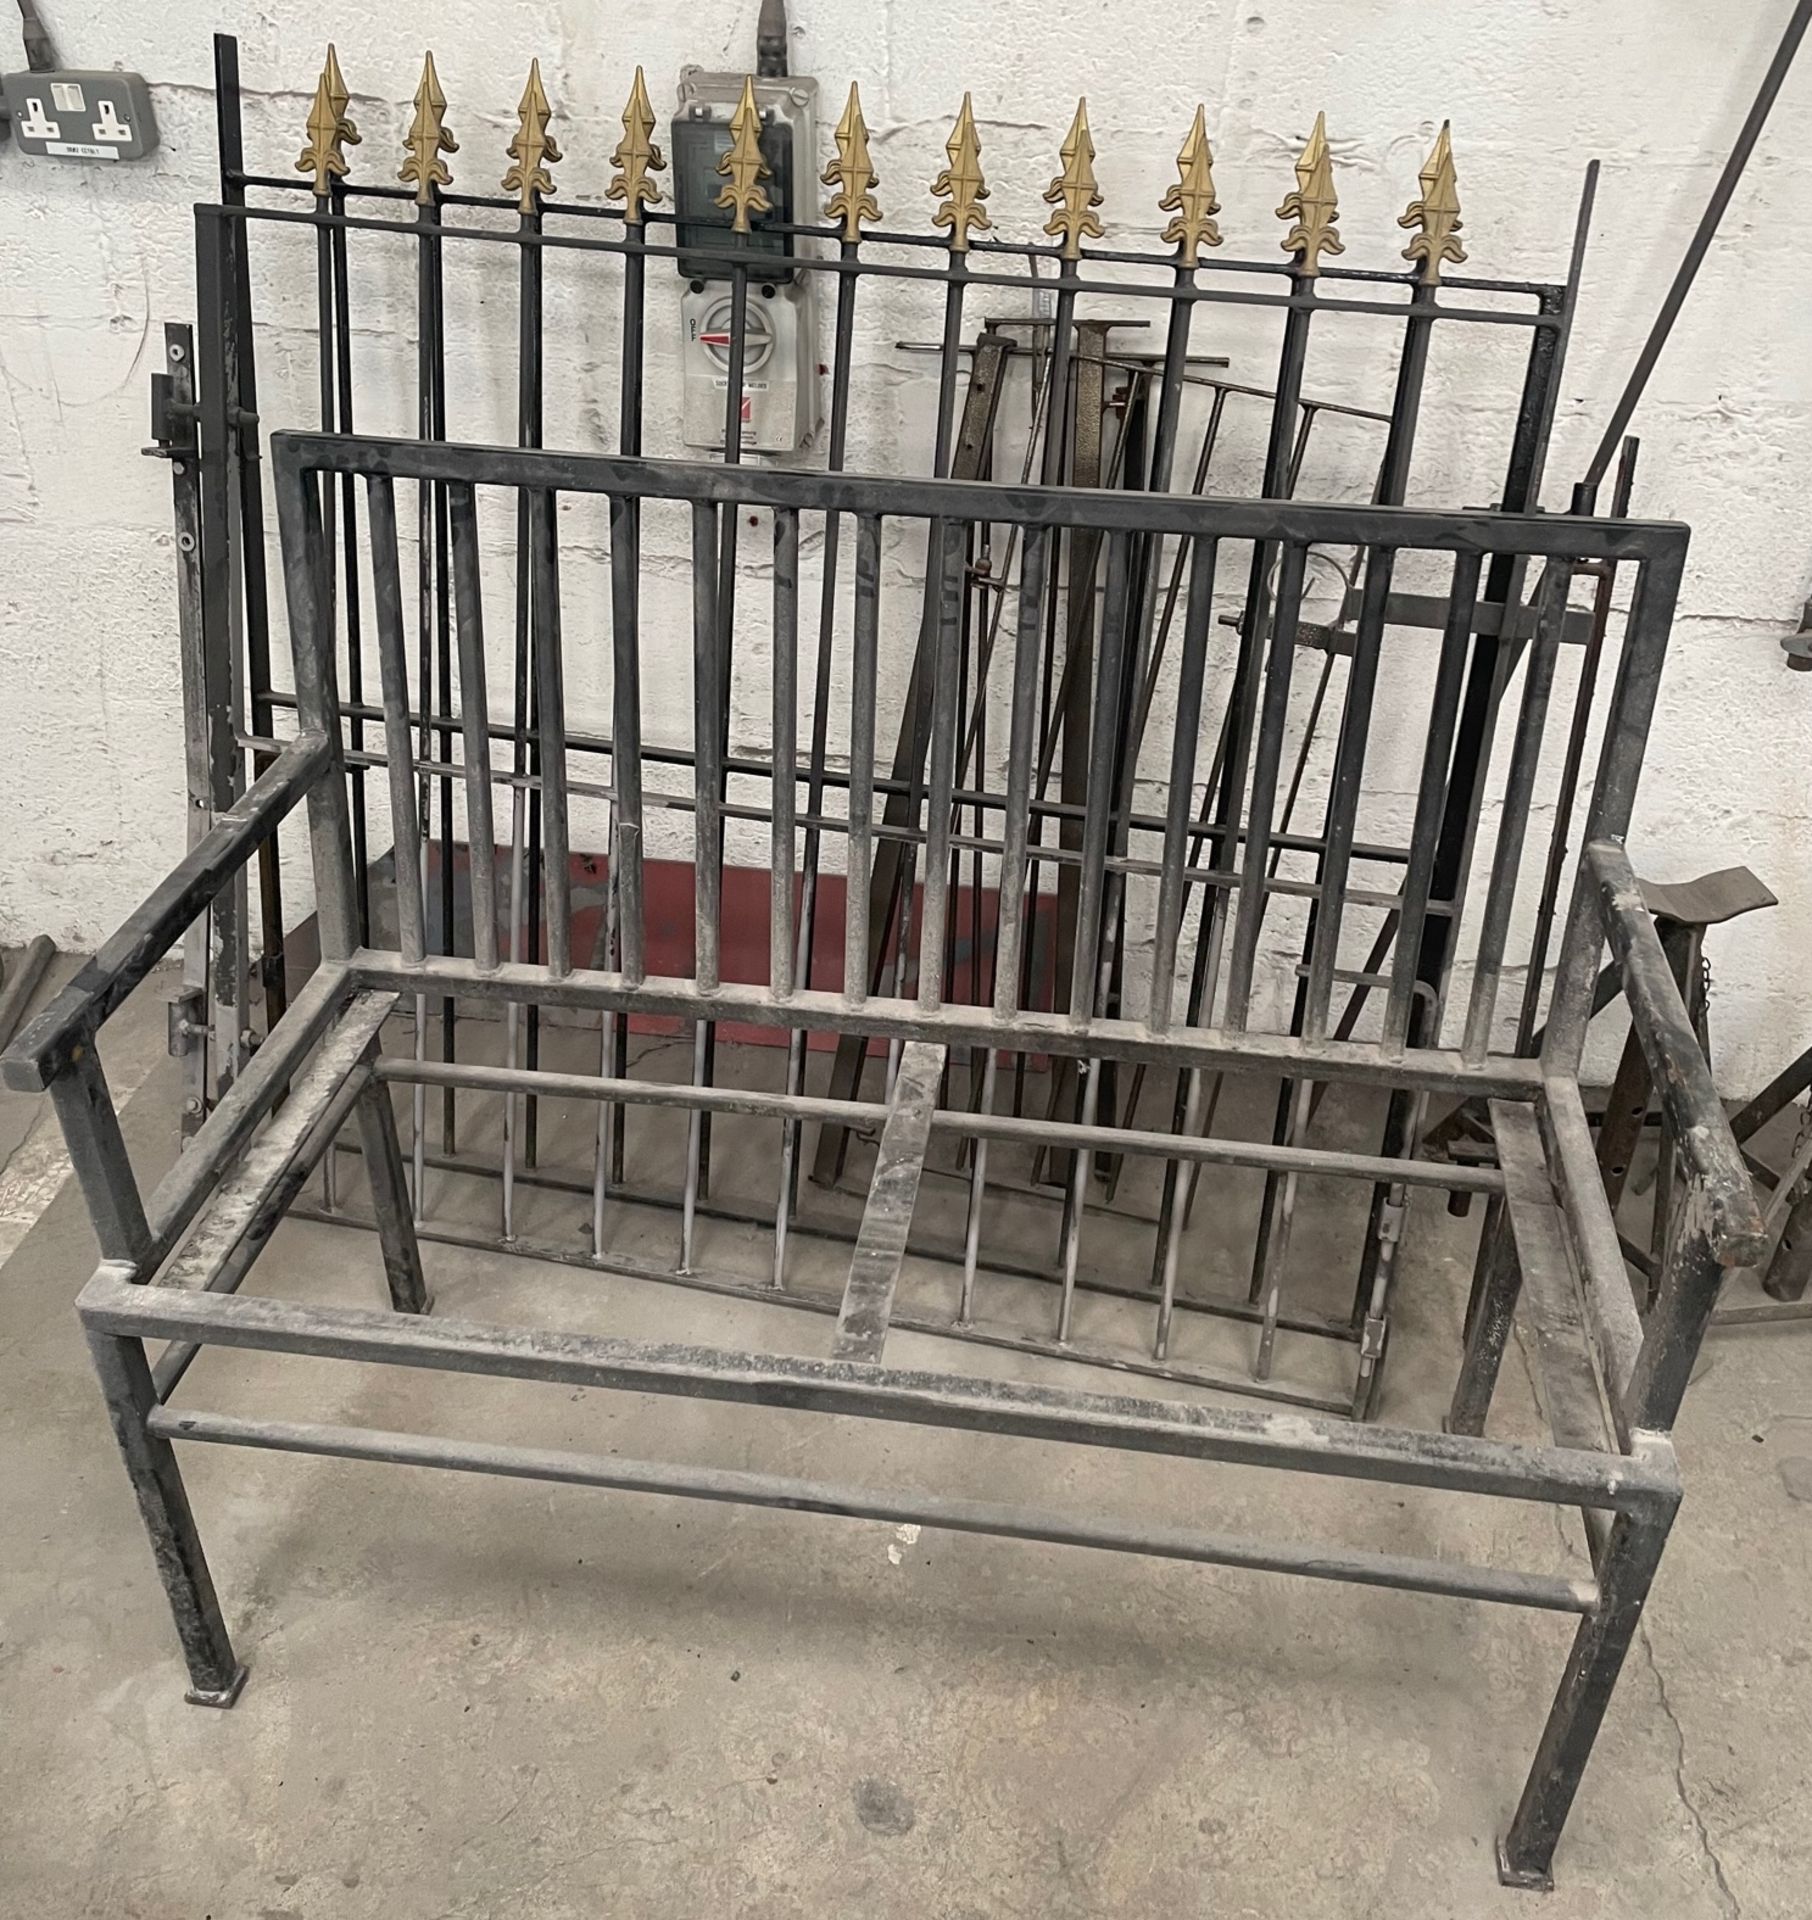 Bench Frame & Two Gate Attachments (Location: Timperley. Please Refer to General Notes)